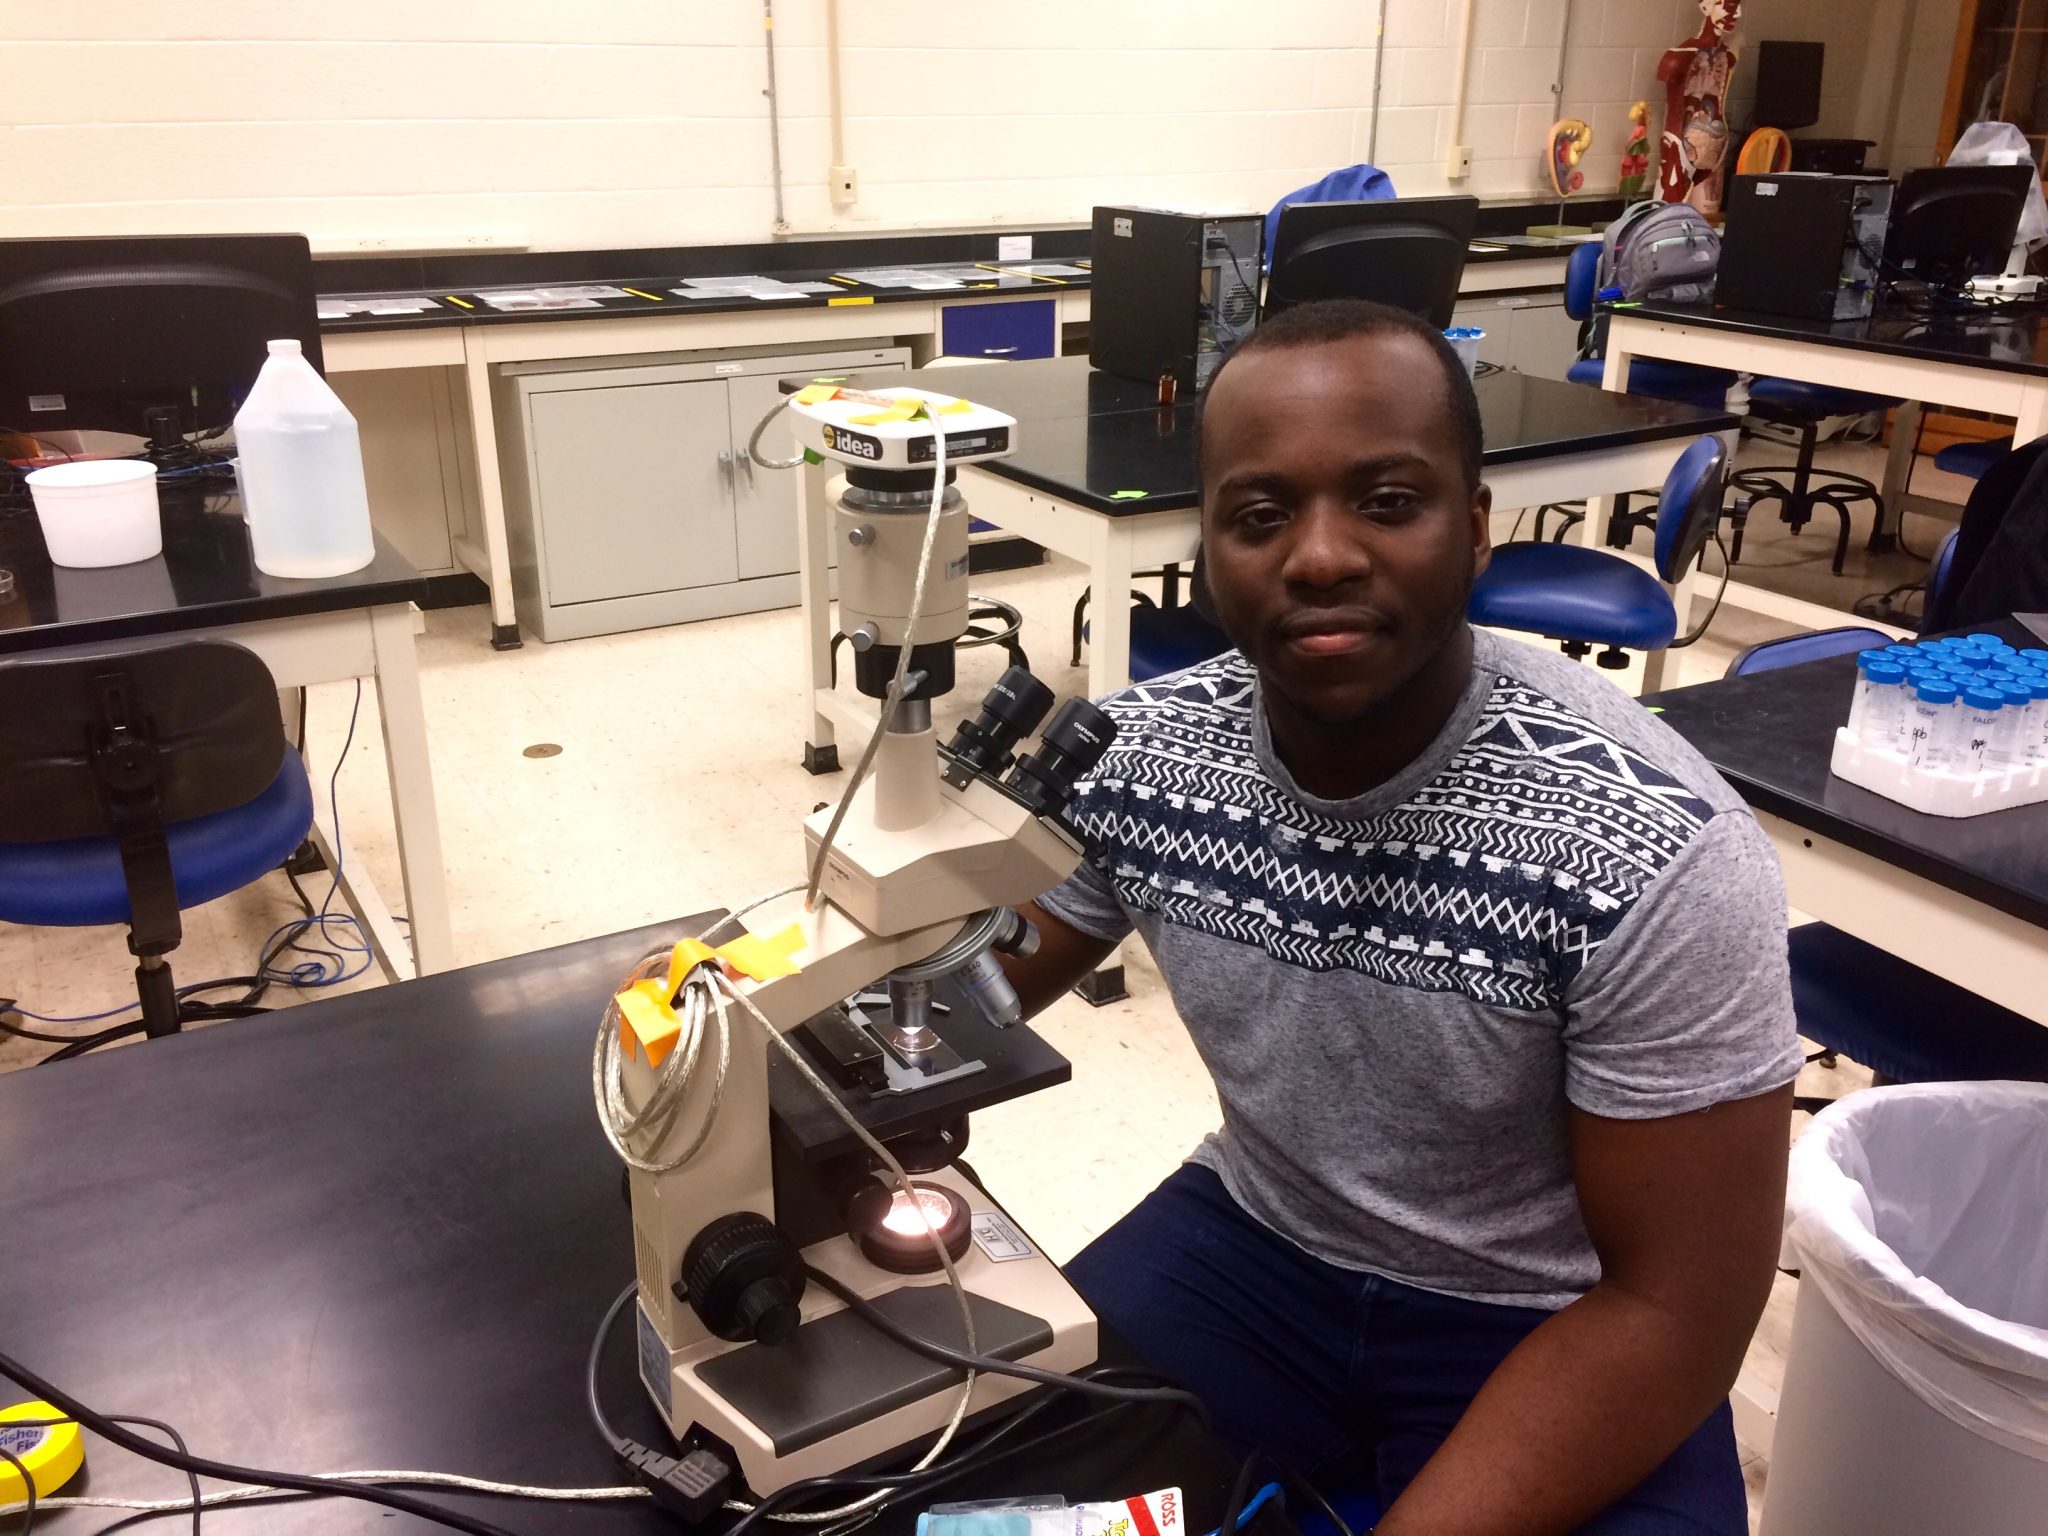 Eric Adjei-Danquah is sitting on a lab bench by a microscope. He is wearing a light grey shirt.